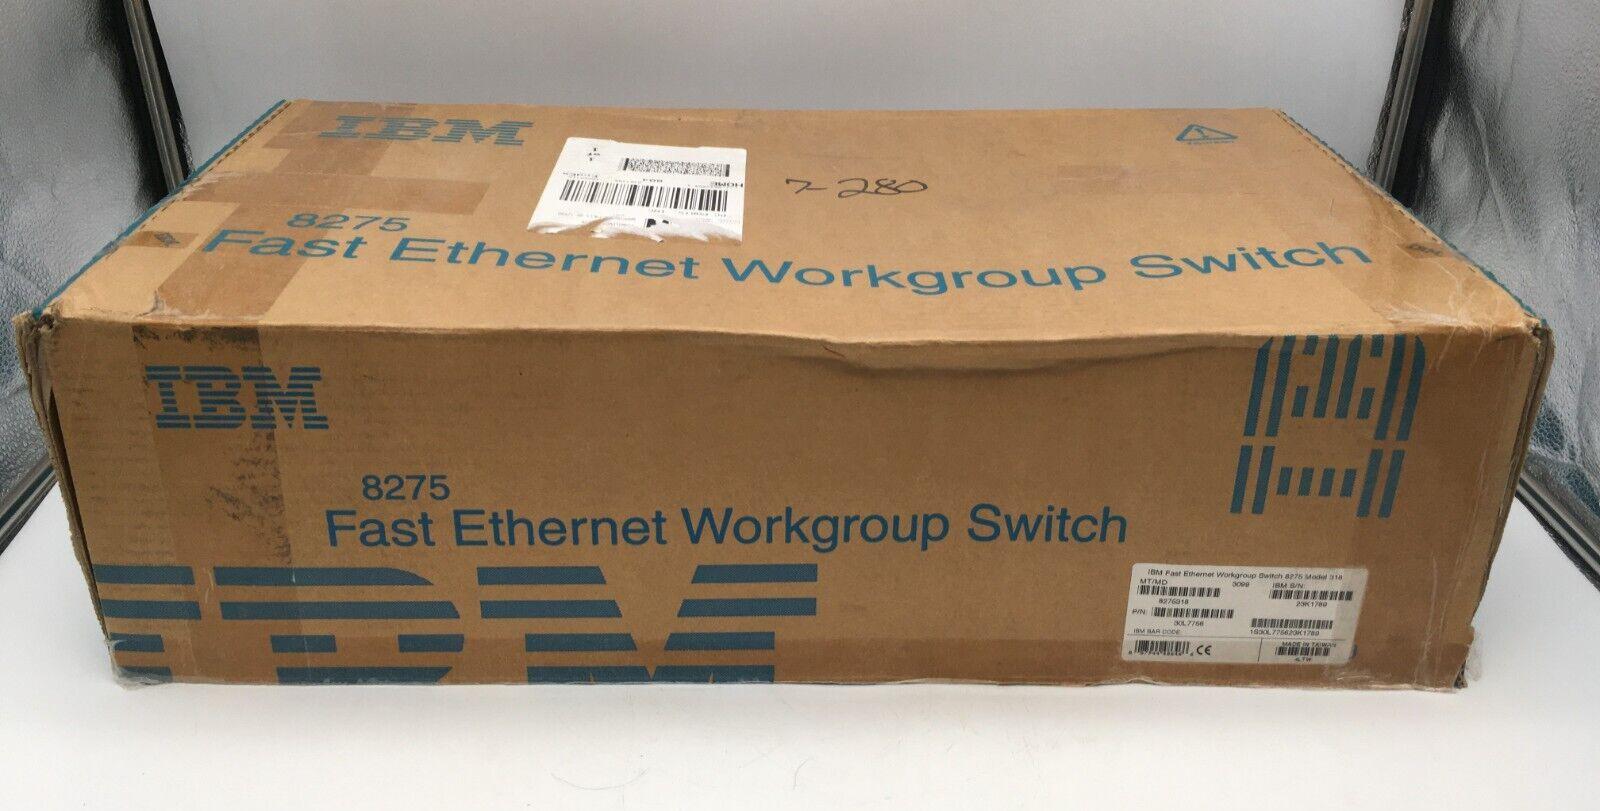 IBM Ethernet Workgroup Switch 8275 Model 318 8275318